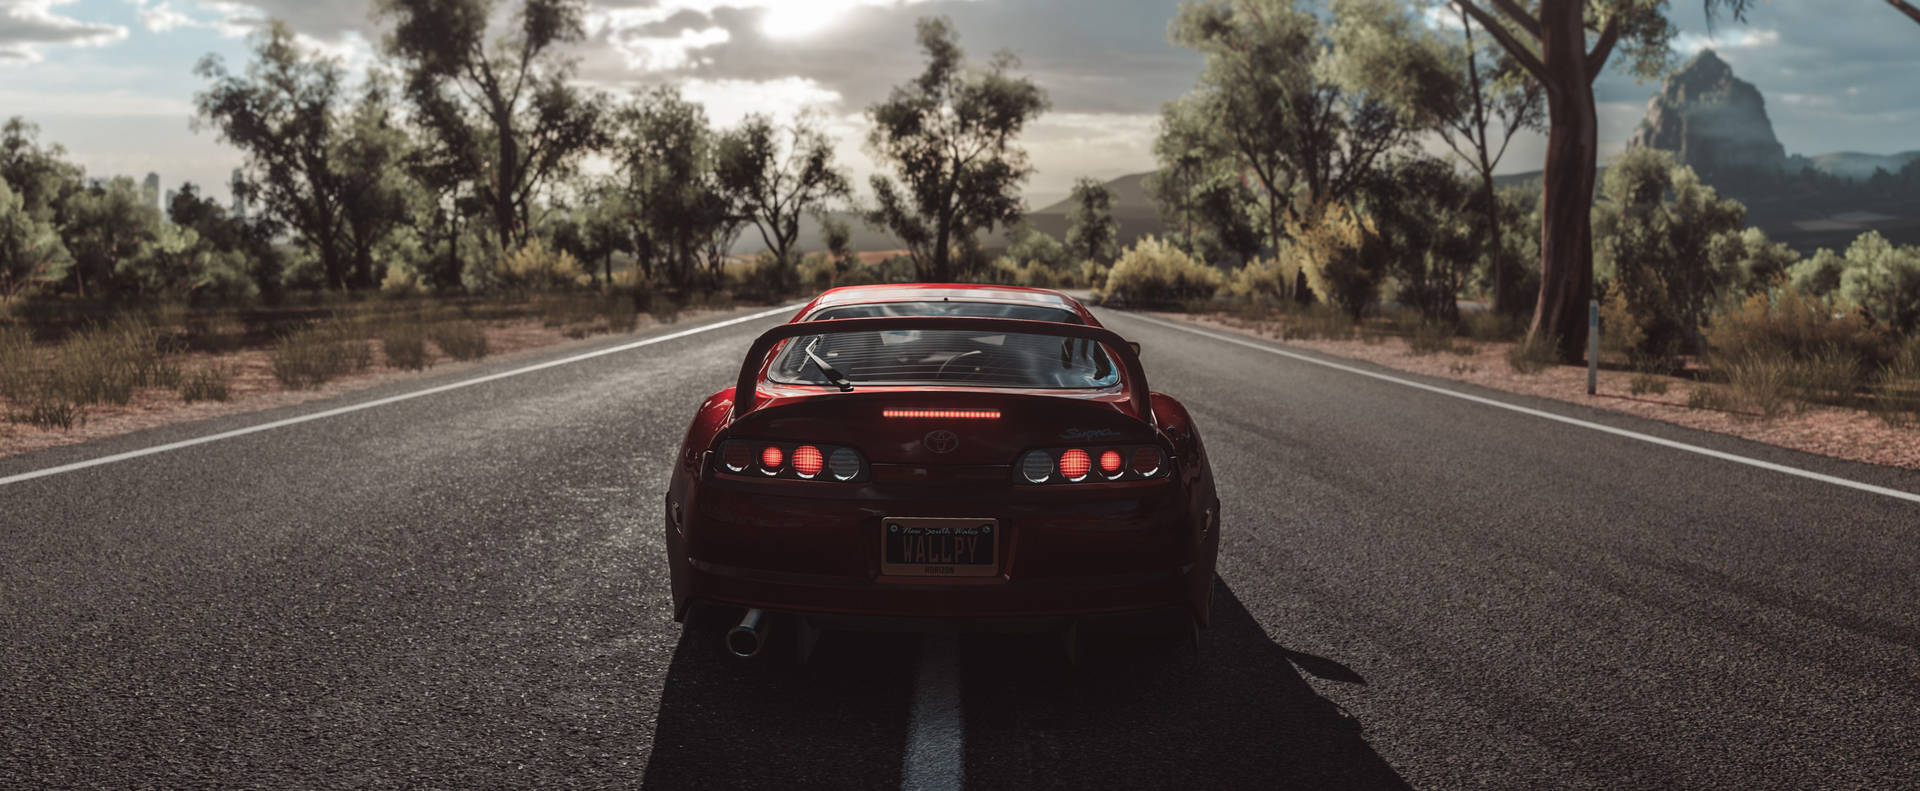 Parked Red Toyota Supra At Road Wallpaper